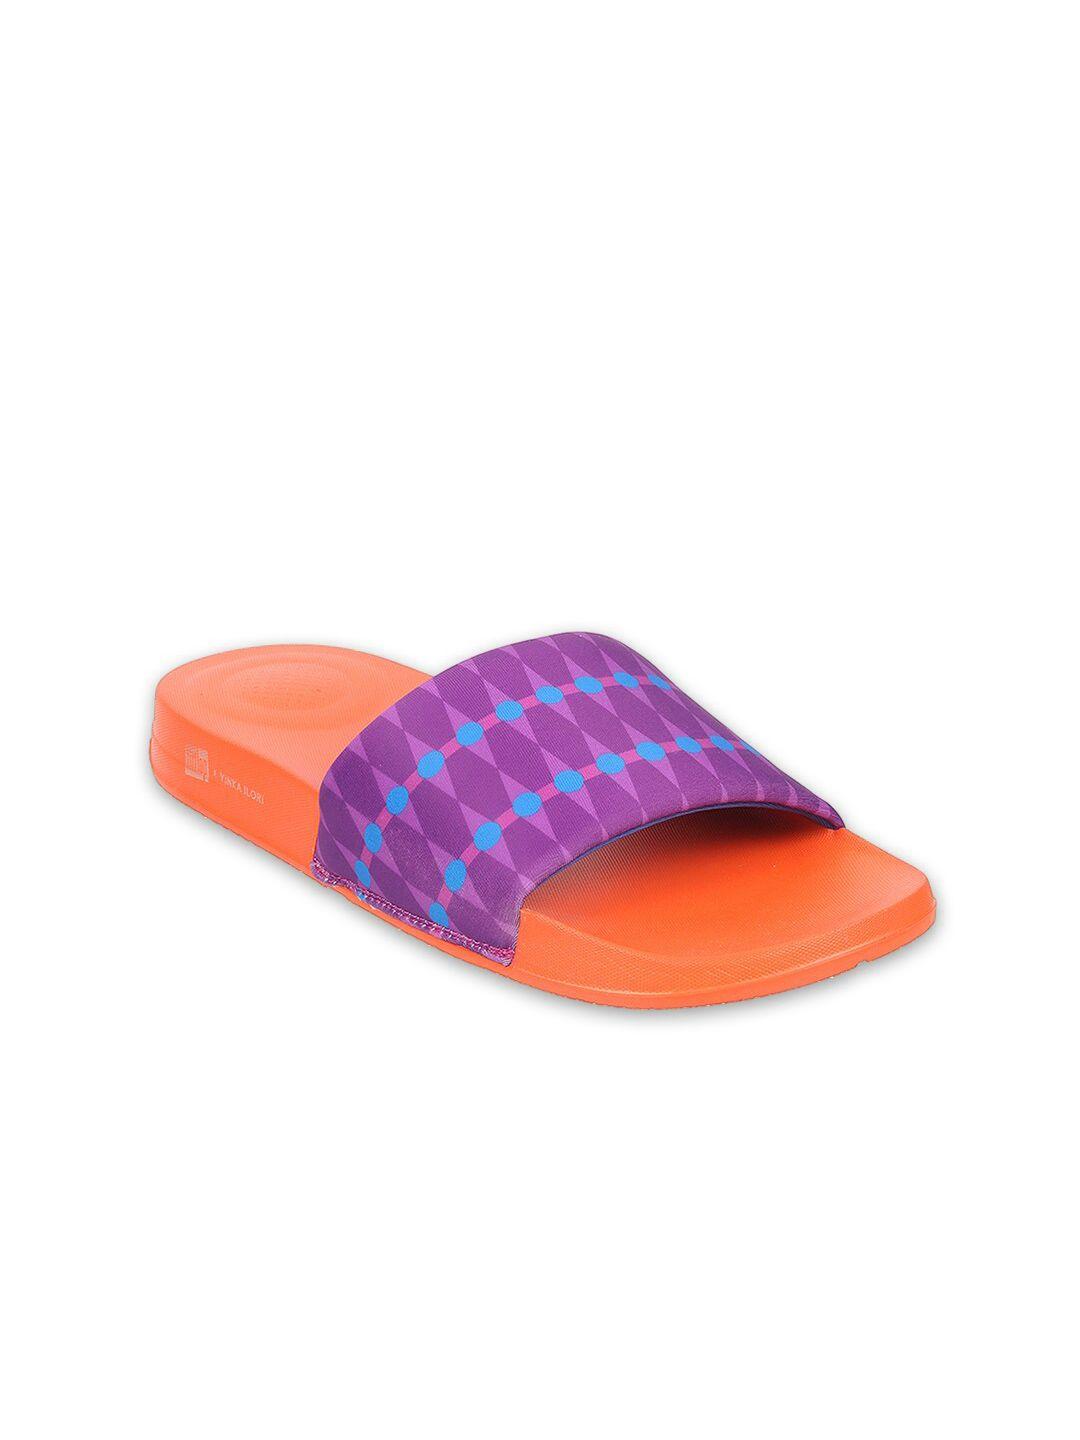 fitflop men printed synthetic casual sliders